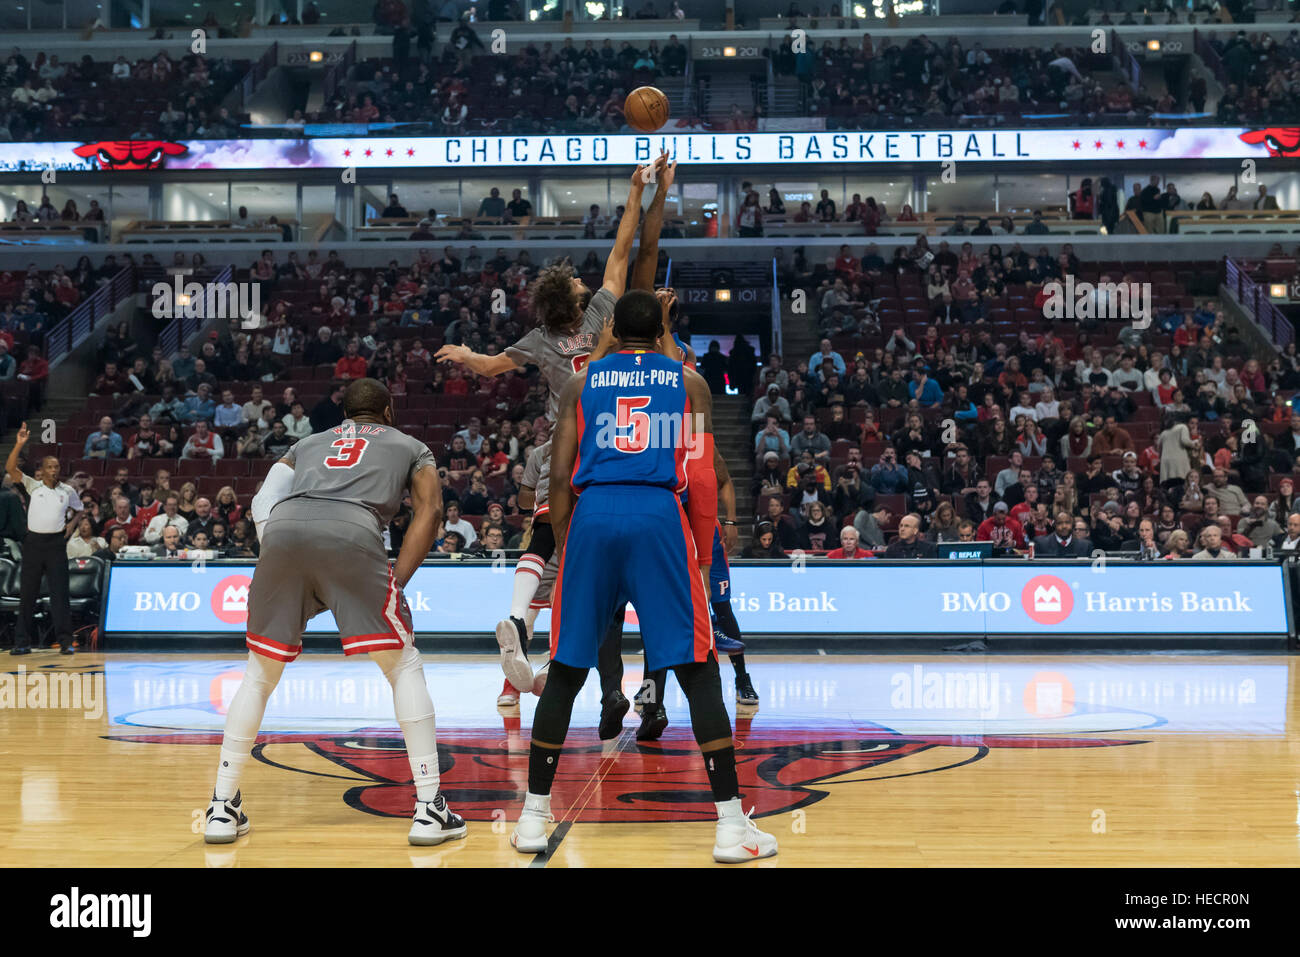 Chicago, USA.  19 December 2016. Tip-off at the Chicago Bulls vs Detroit Pistons game at the United Center in Chicago. Final score - Detroit Pistons 82, Chicago Bulls 113.  © Stephen Chung / Alamy Live News Stock Photo